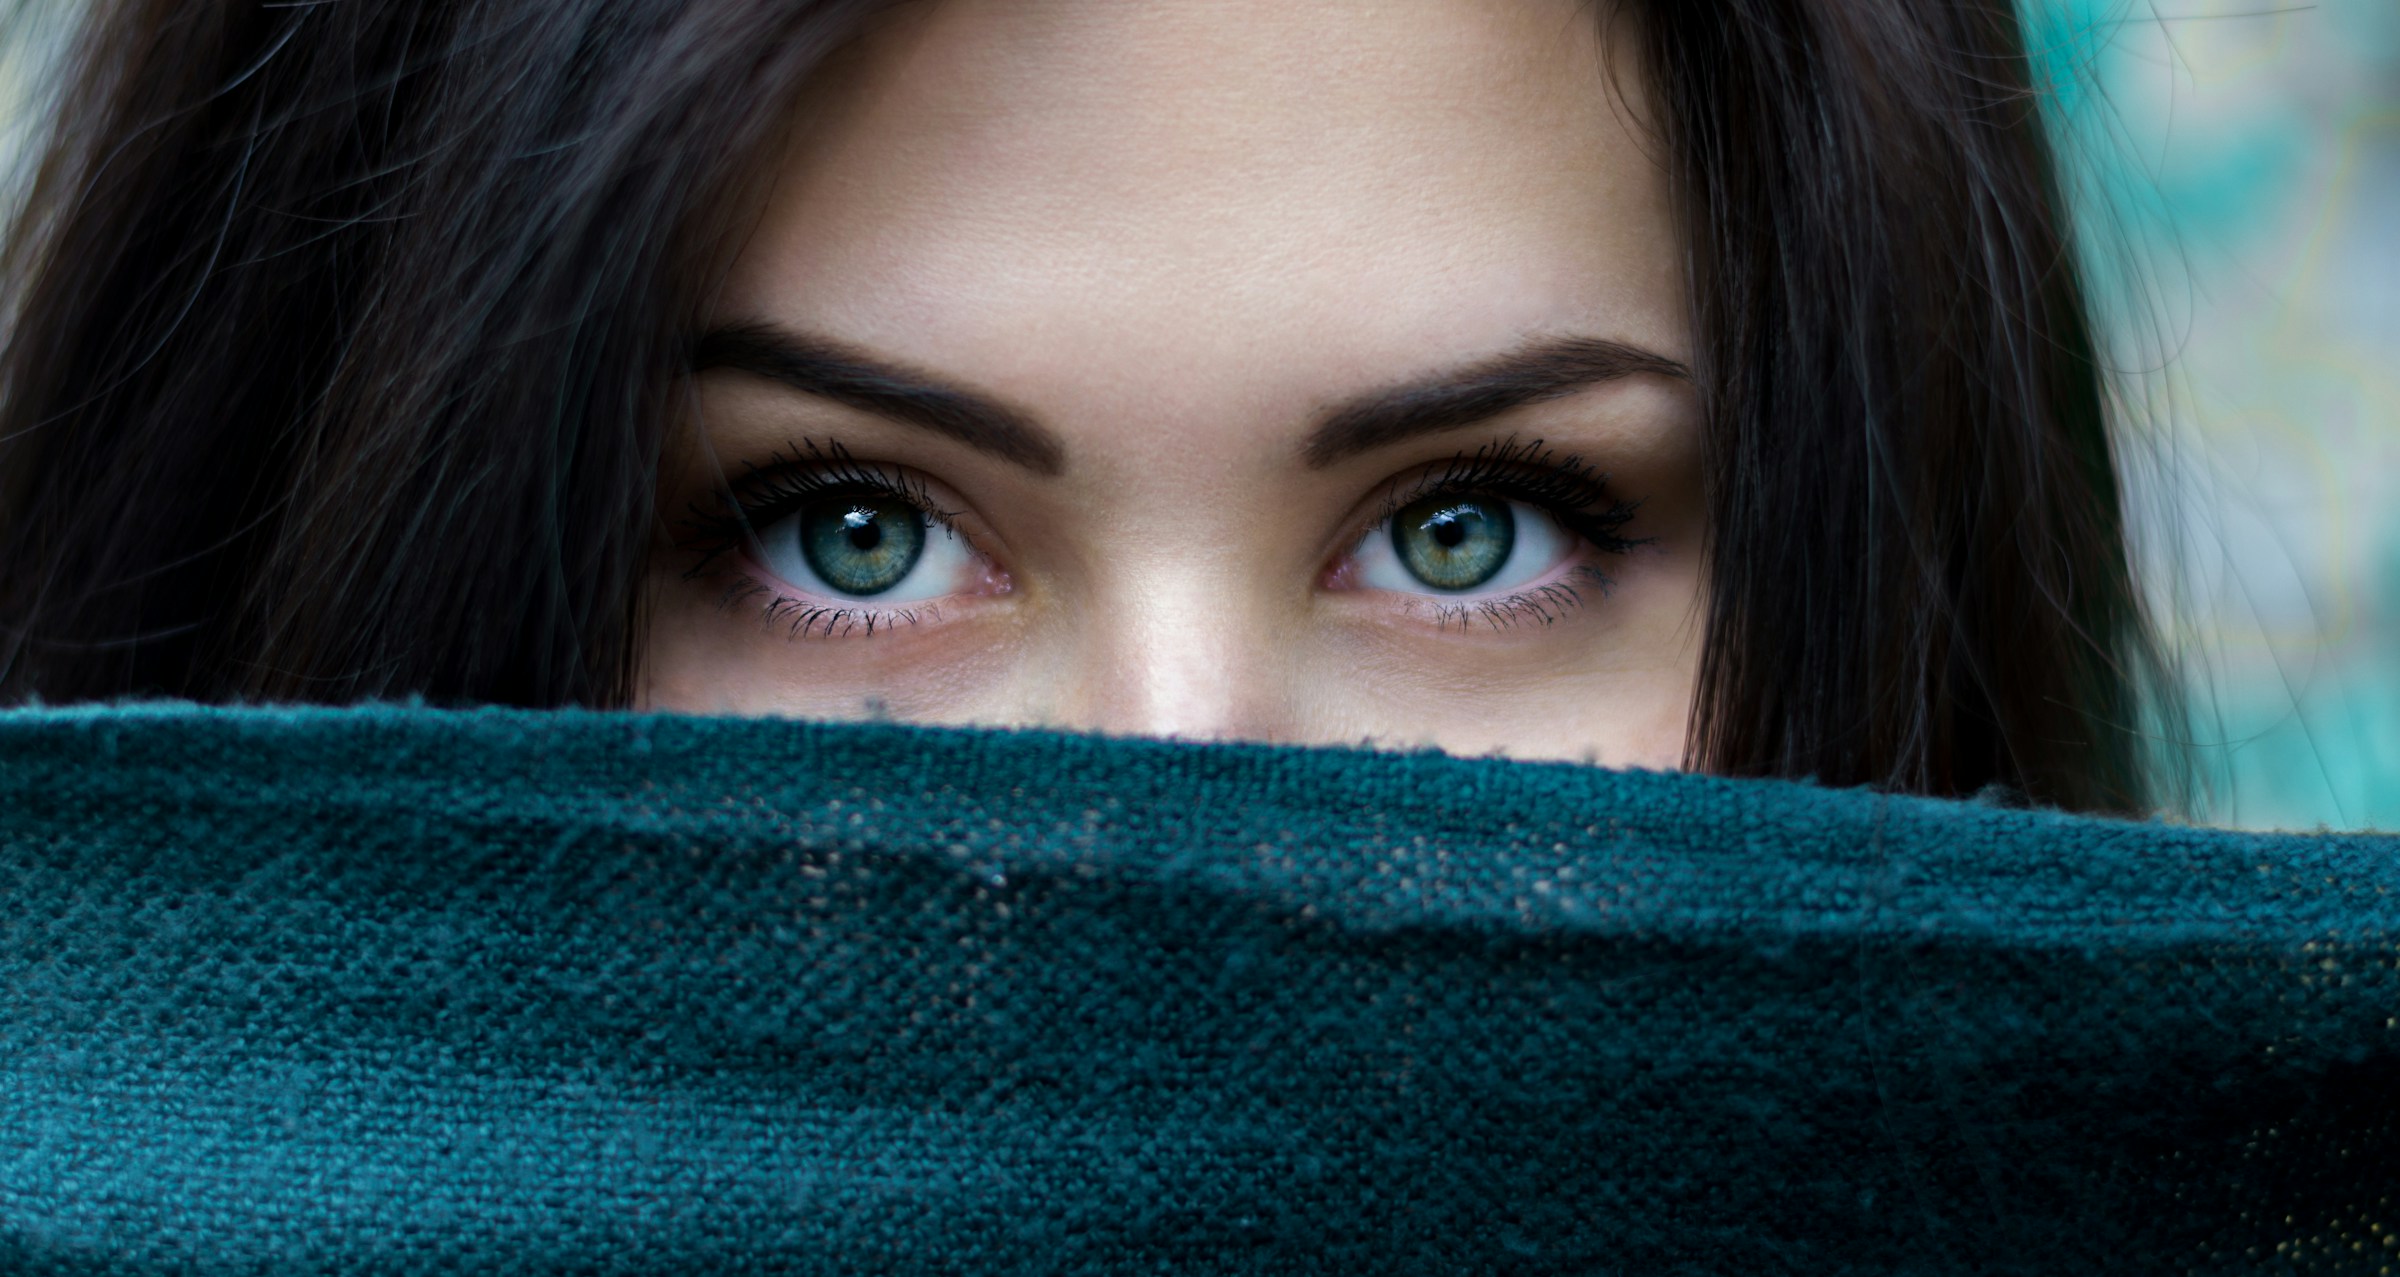 A close-up of a young woman's eyes | Source: Unsplash